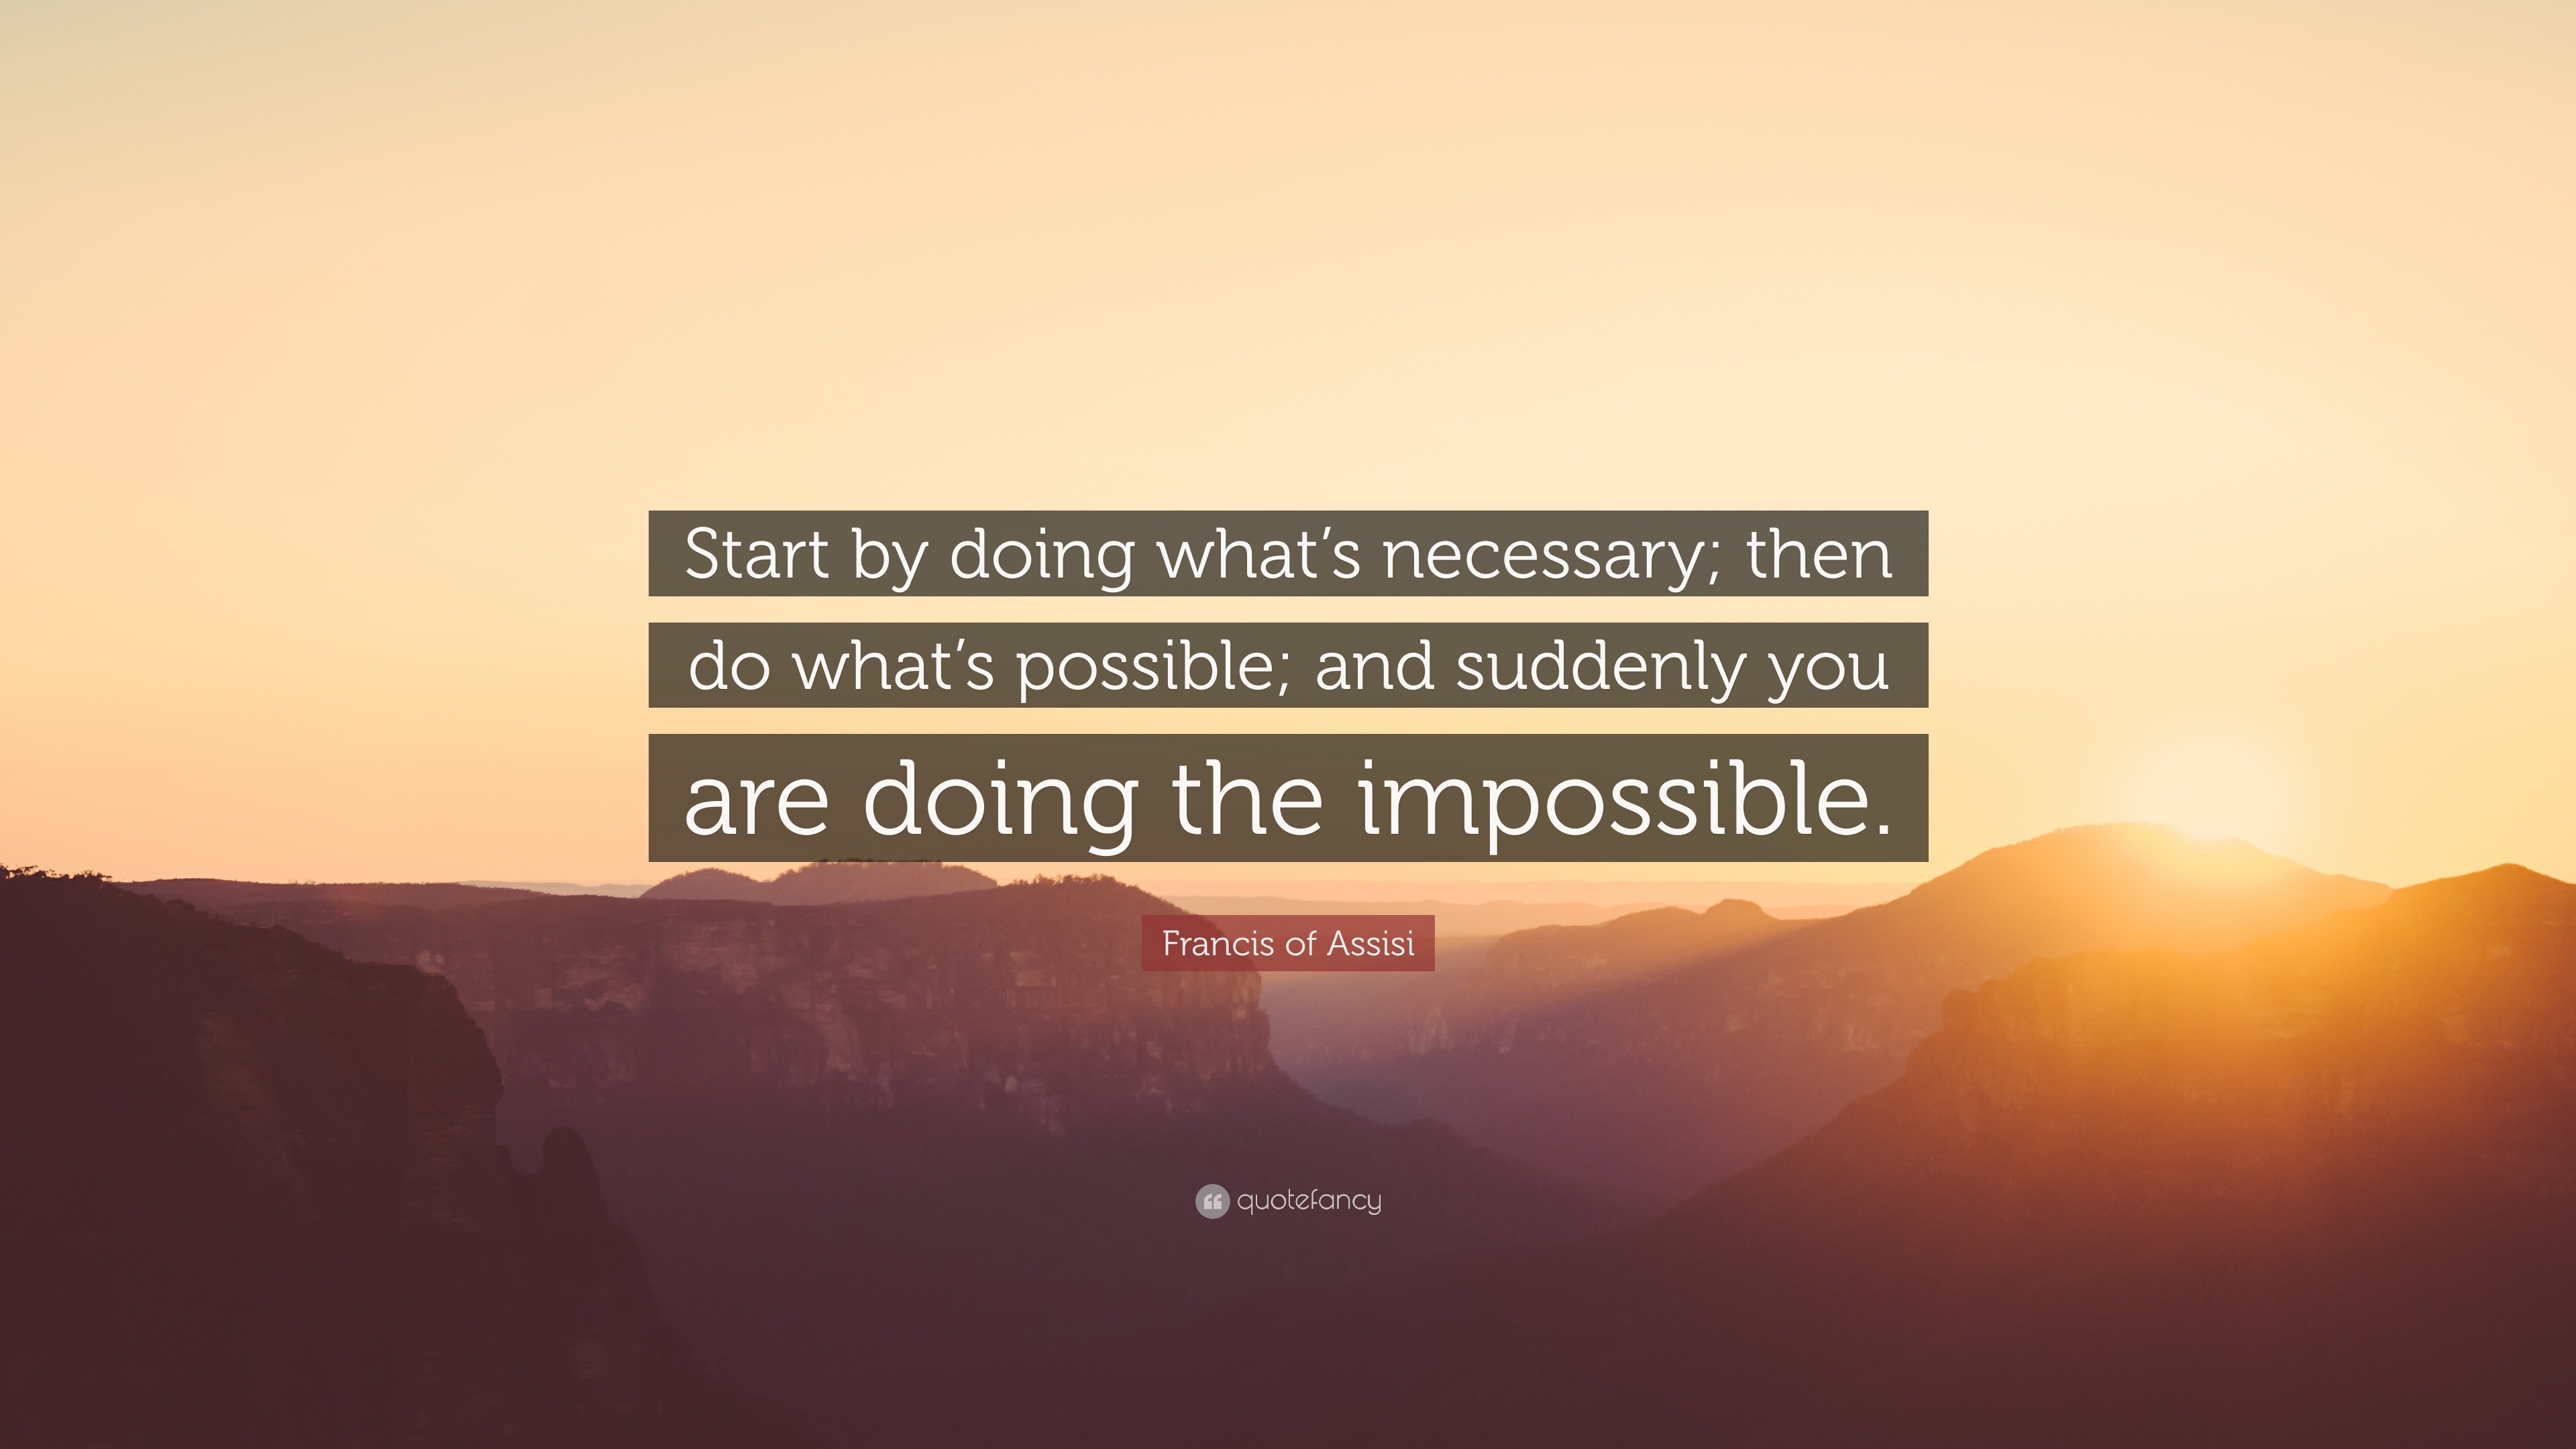 Francis of Assisi Quote: "Start by doing what's necessary ...